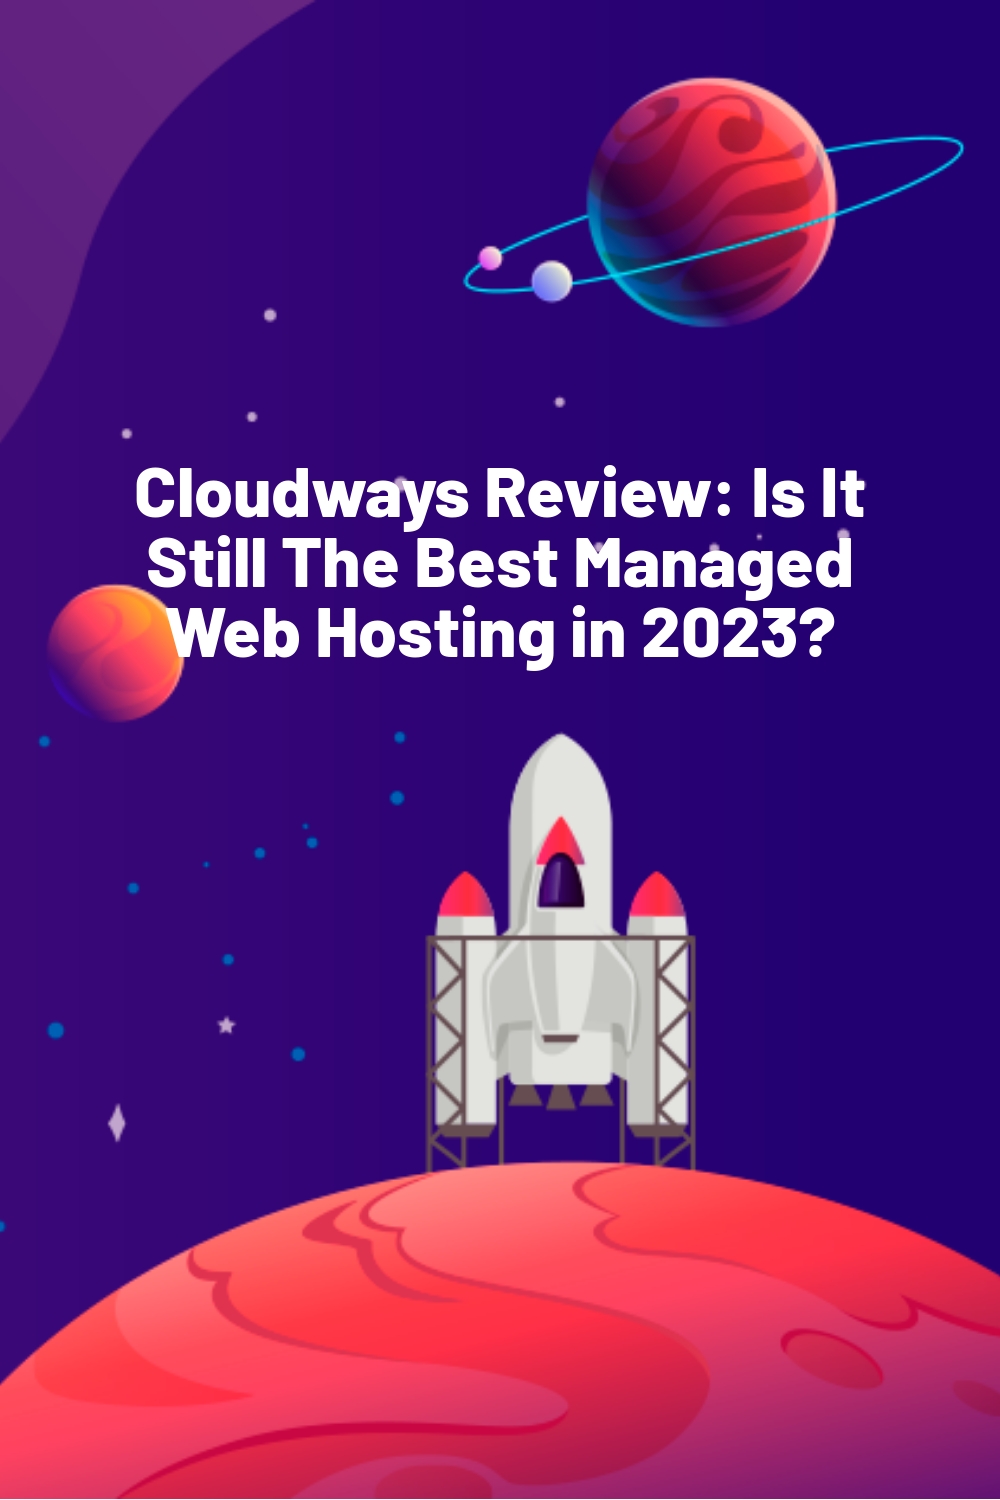 Cloudways Review: Is It Still The Best Managed Web Hosting in 2023?